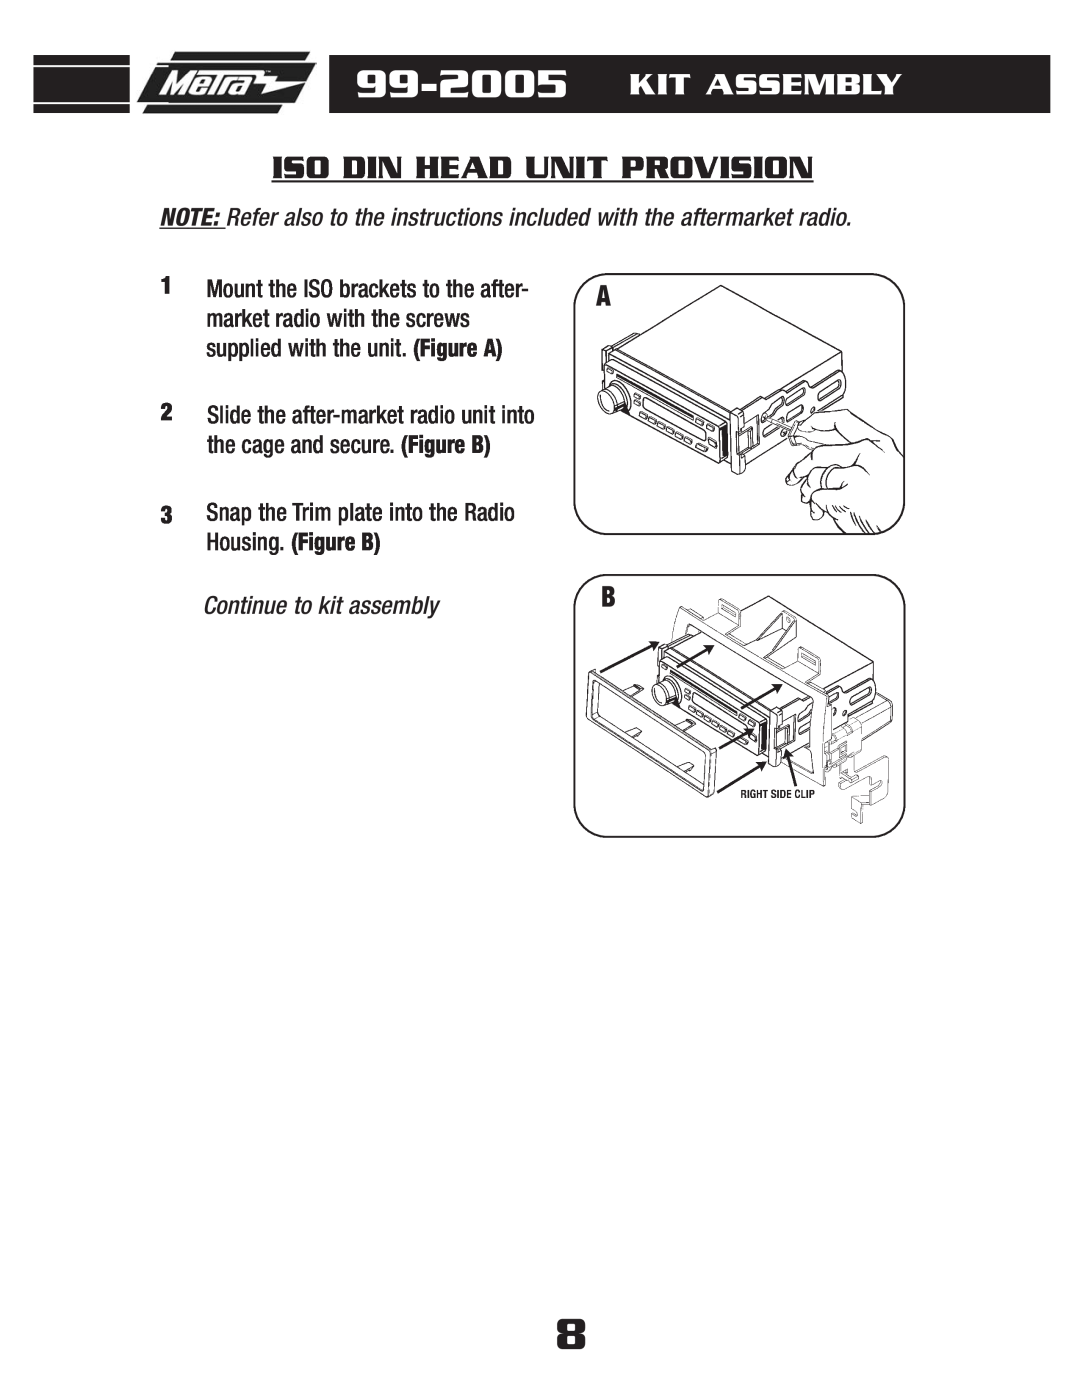 Metra Electronics 99-2005 installation instructions Iso Din Head Unit Provision, Kit Assembly, Continue to kit assembly 